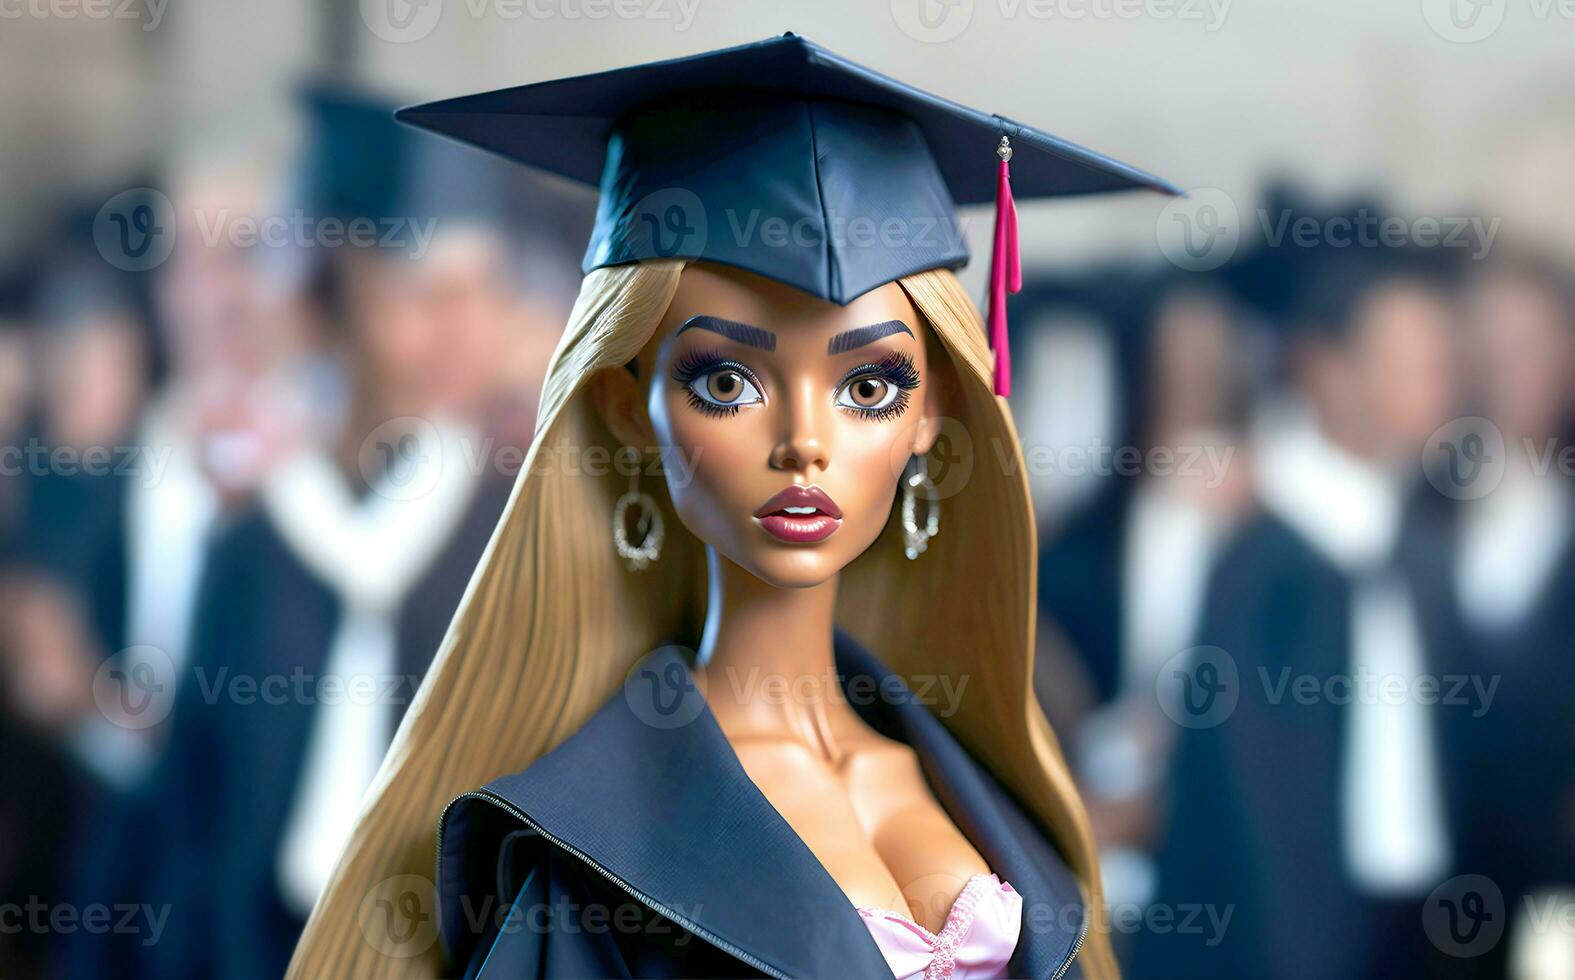 Cute cartoon school girl, plastic doll in college or graduate university. Student learning, concept of education. photo